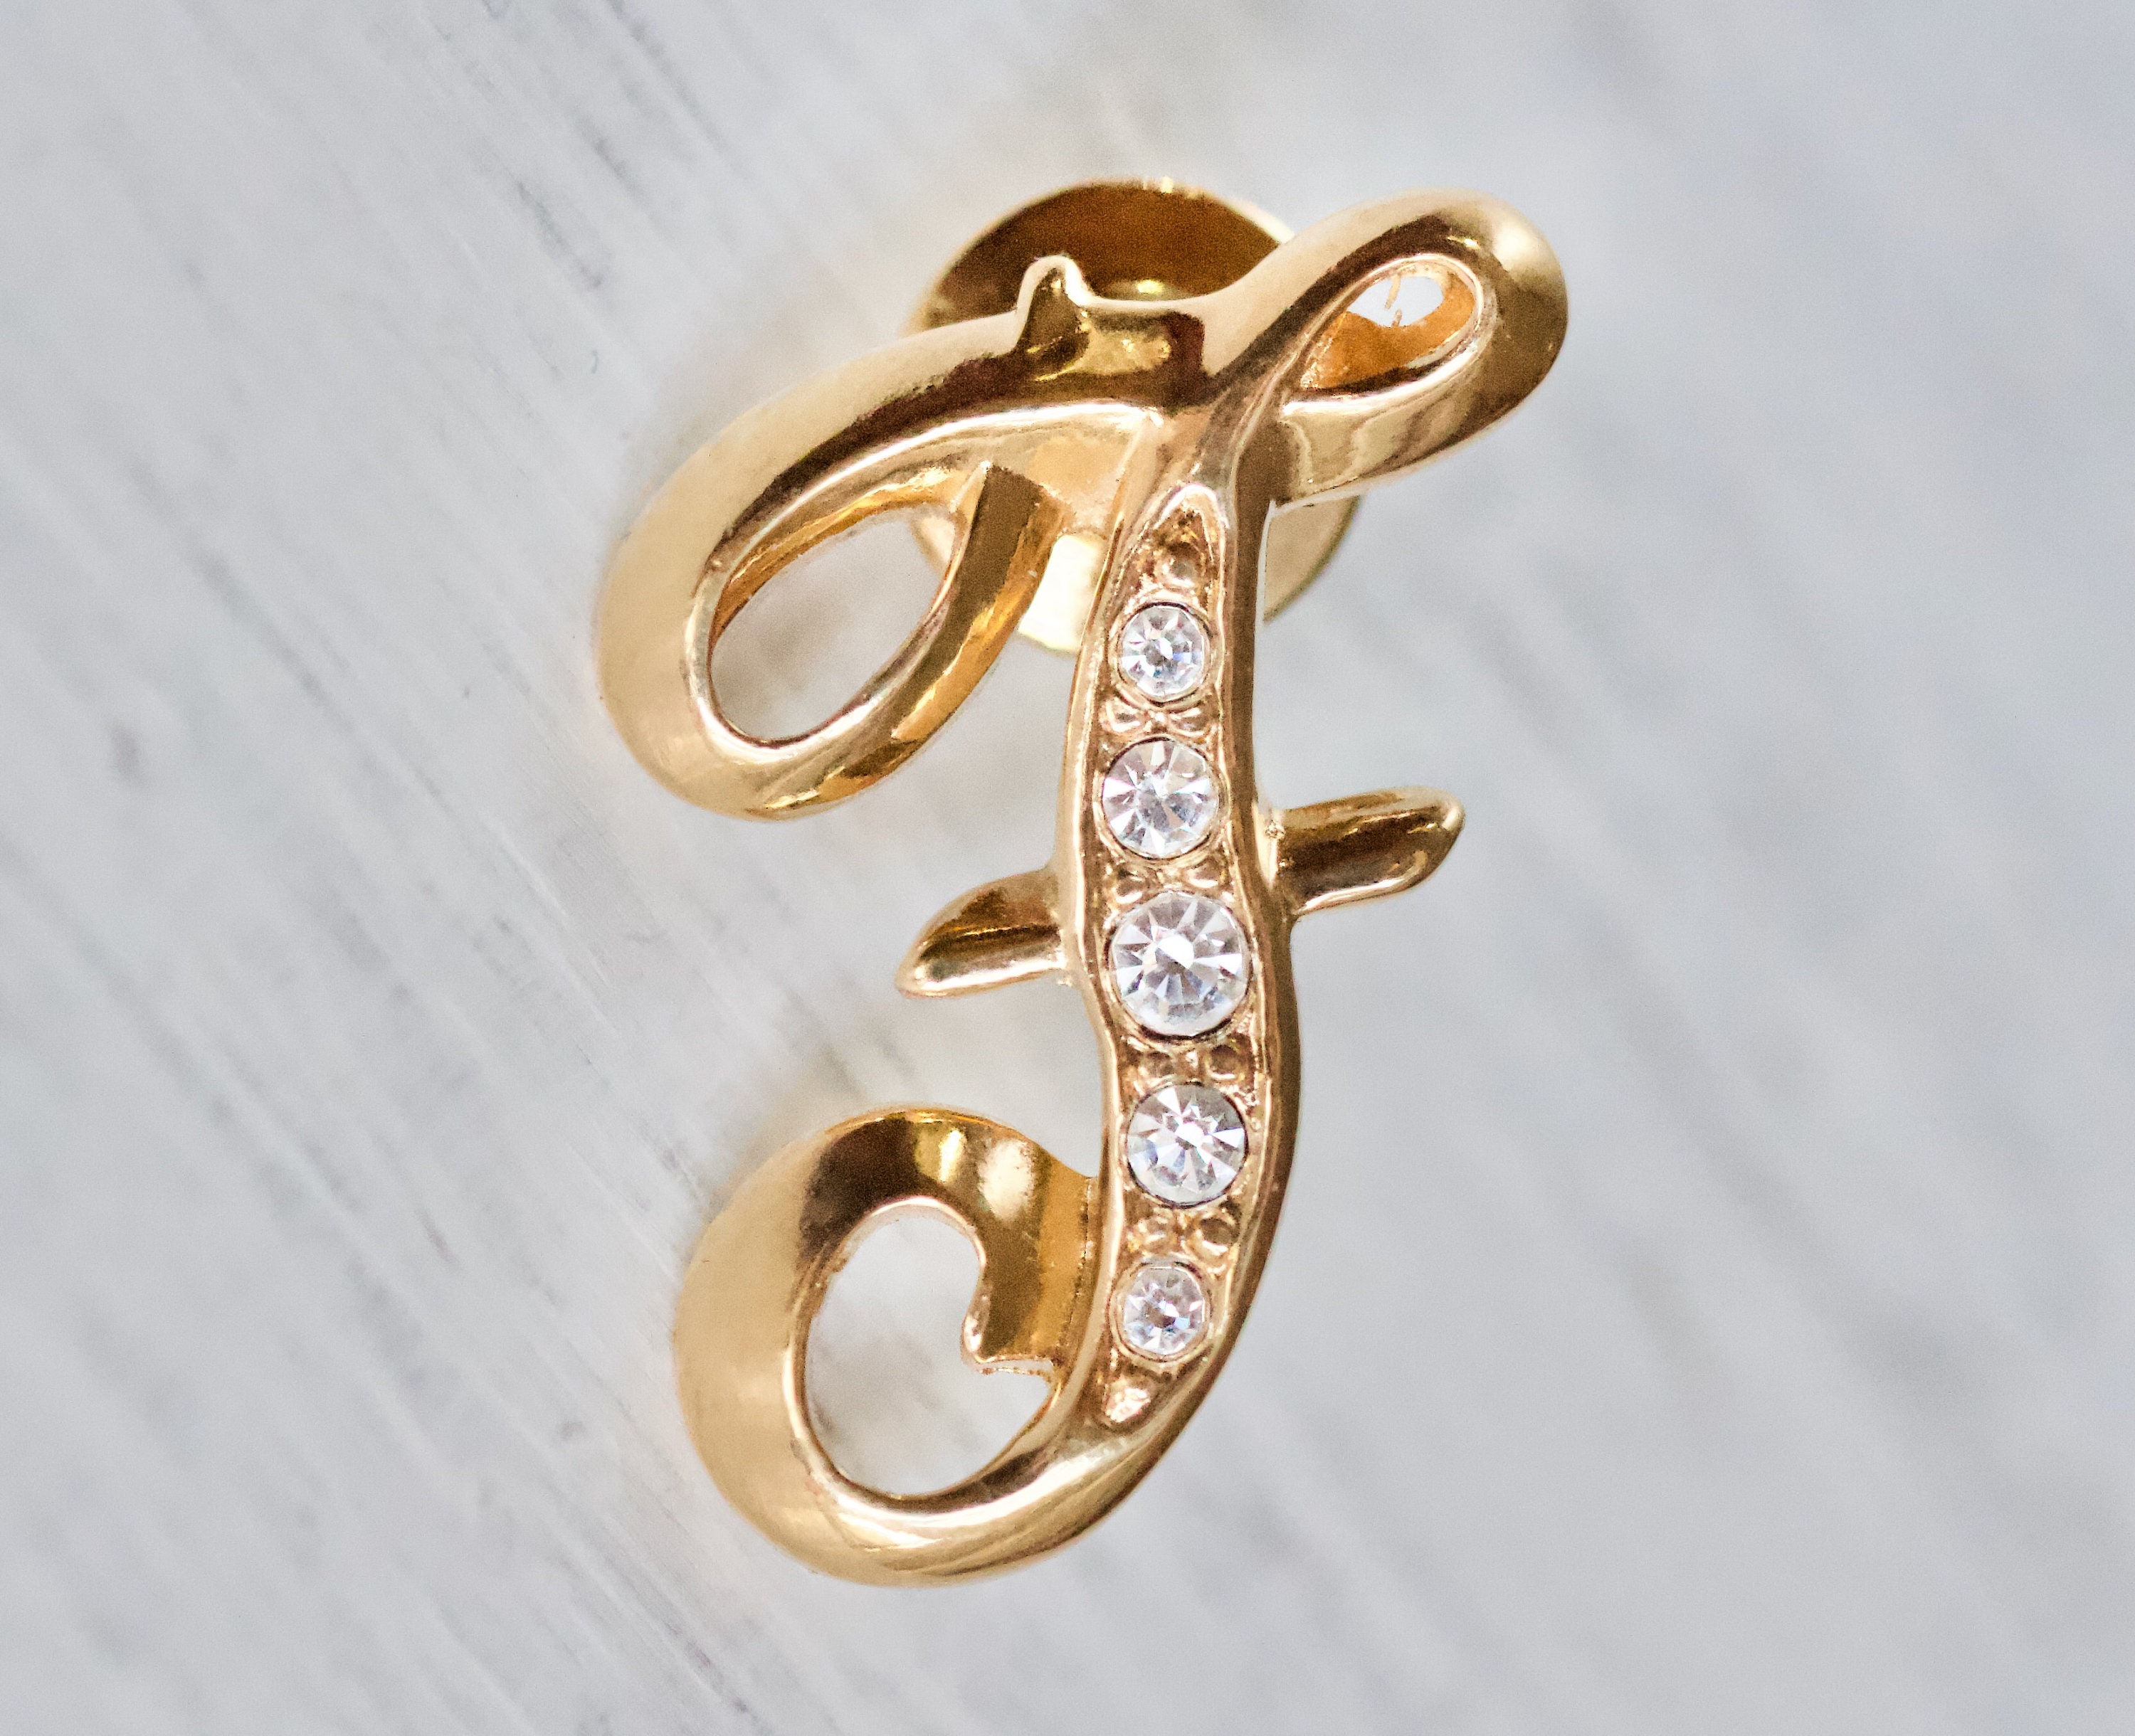 Gold Initial Letter Brooch, Pin or Magnet